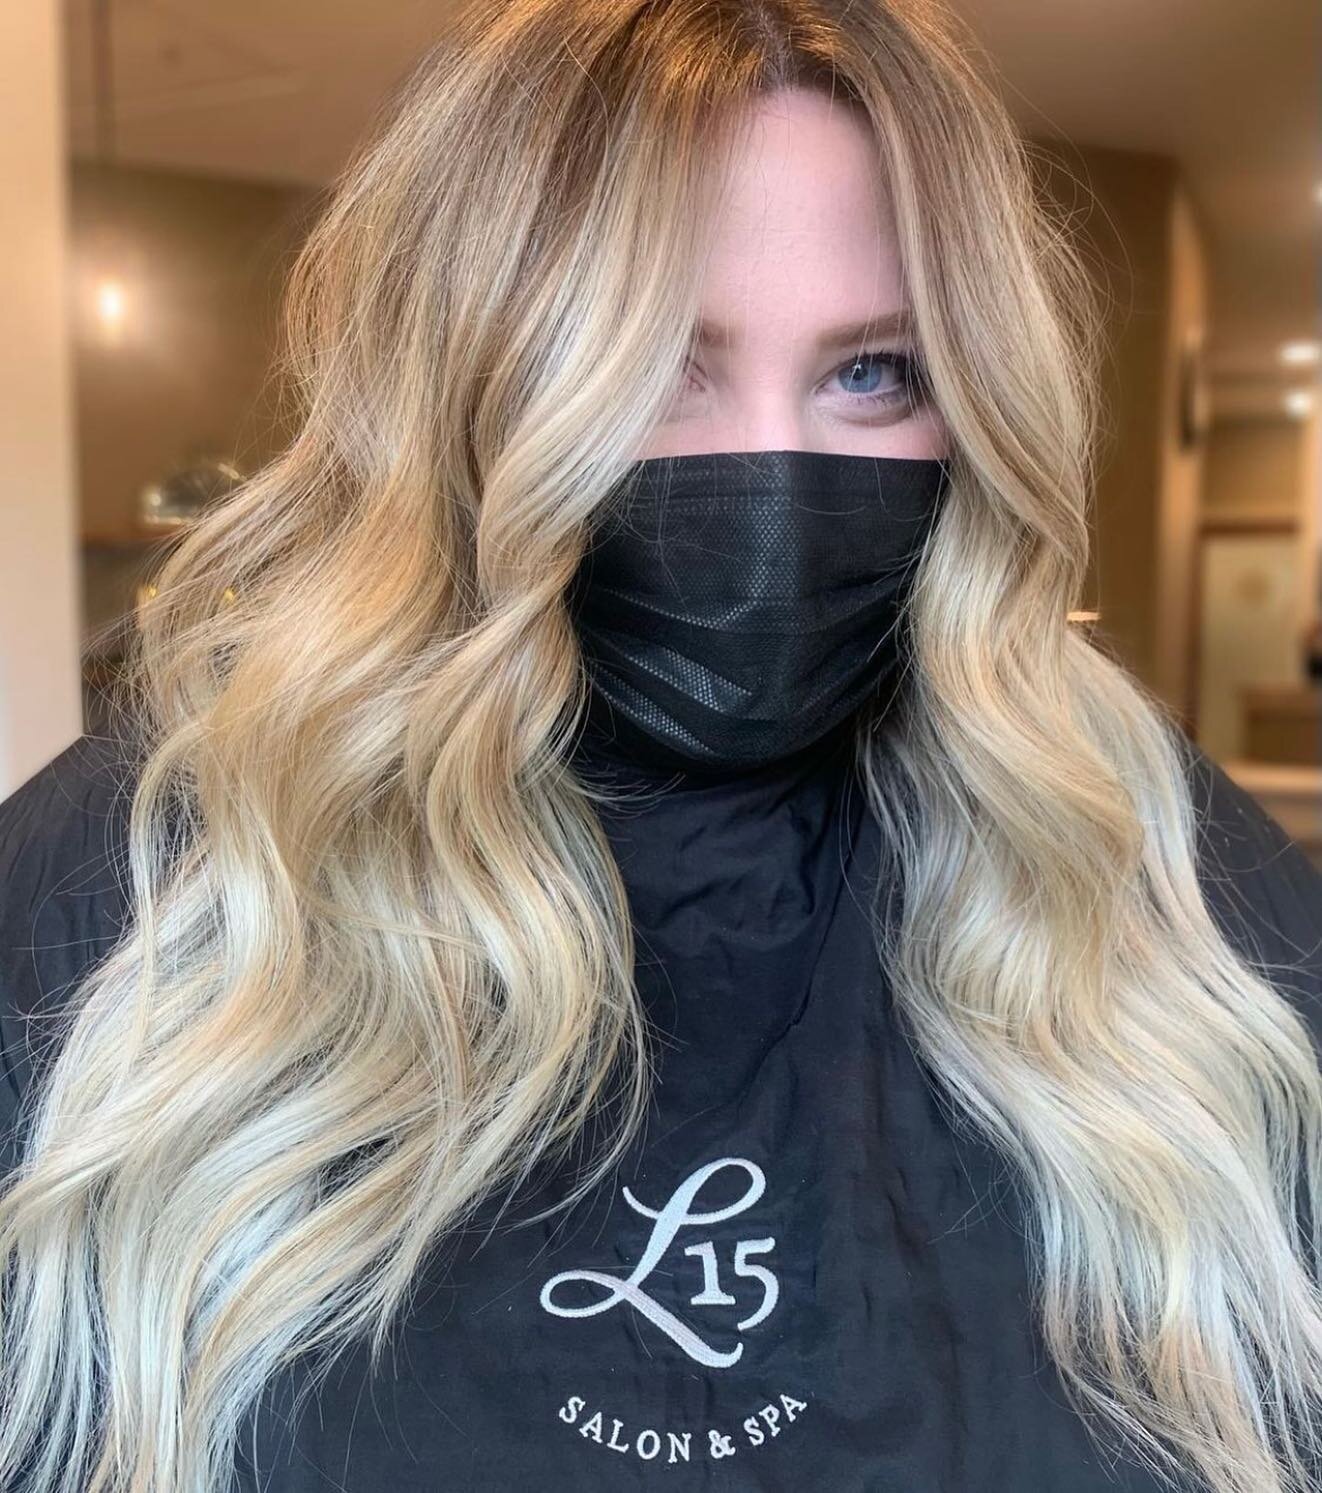 Have you sat in @morganlynnstyles chair yet? 😍

Service pictured//Balayage &amp; Base Color

Styled// @leafandflowerhair @randco

-
-
-
-
@l15salon
#issaquahsalon #issaquahblonde #issaquahblondespecialist #issaquahhairstylist #bellevuehairstylist #b